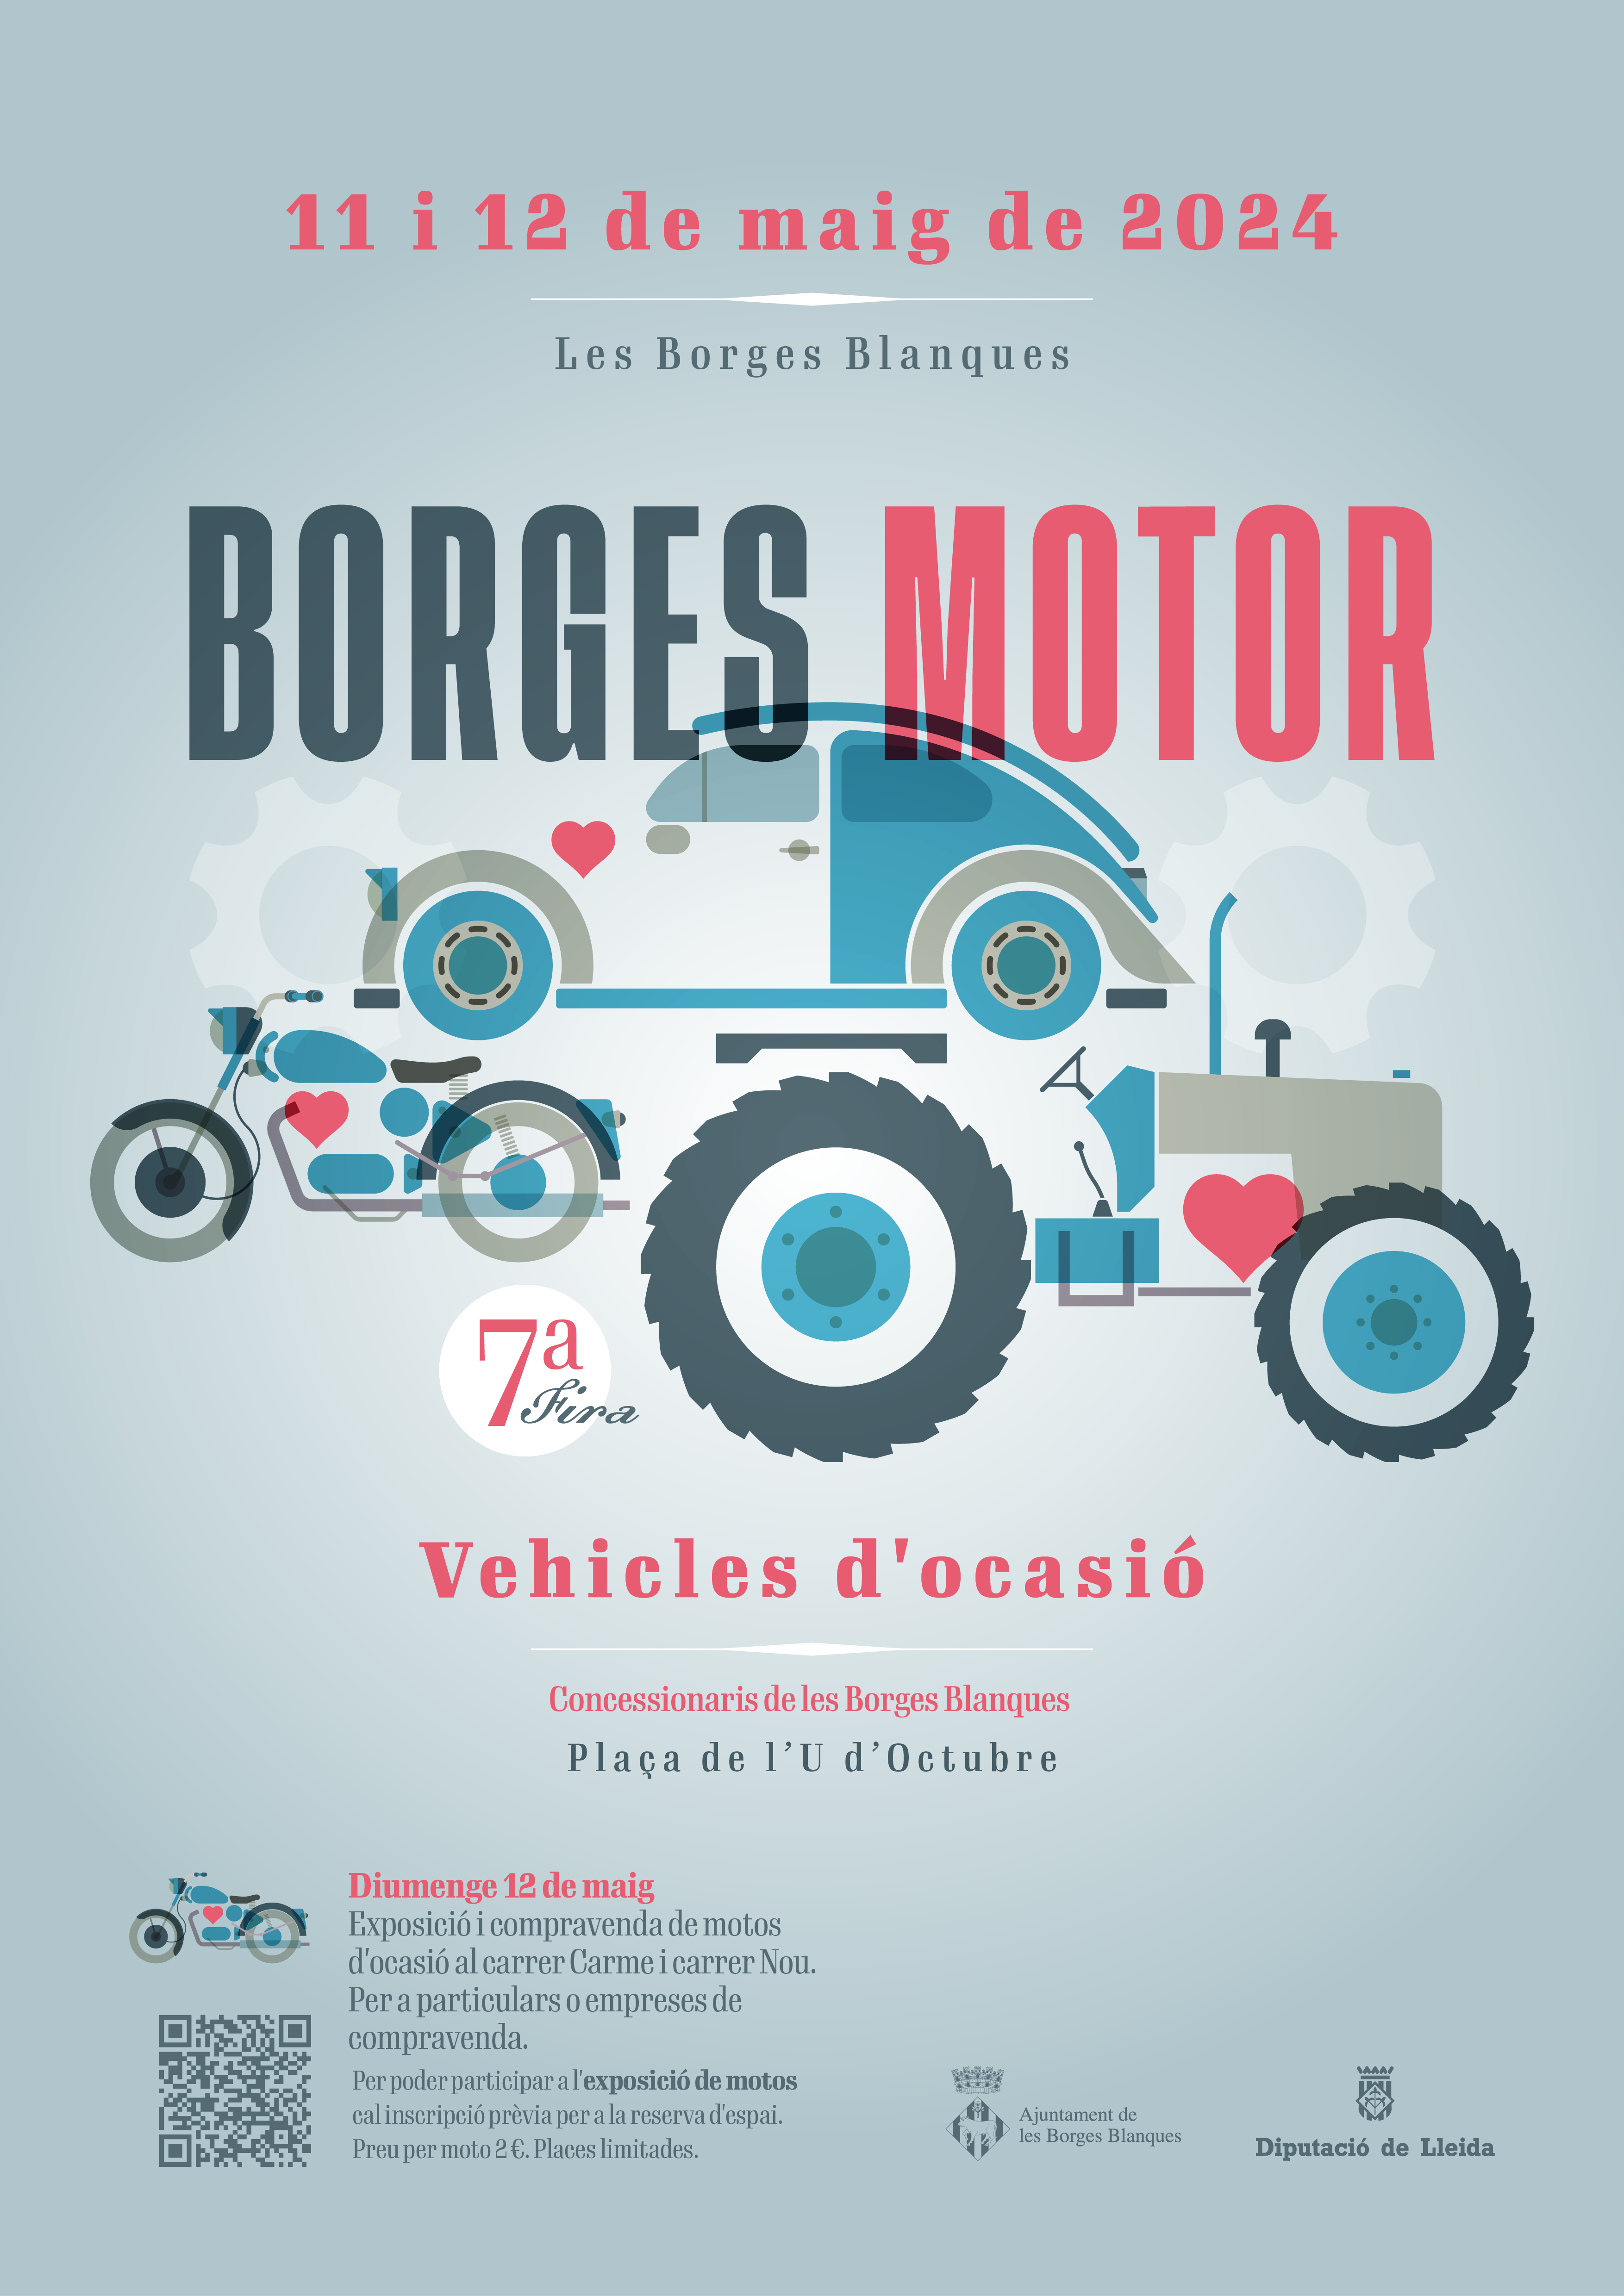 7a Fira Borges Motor